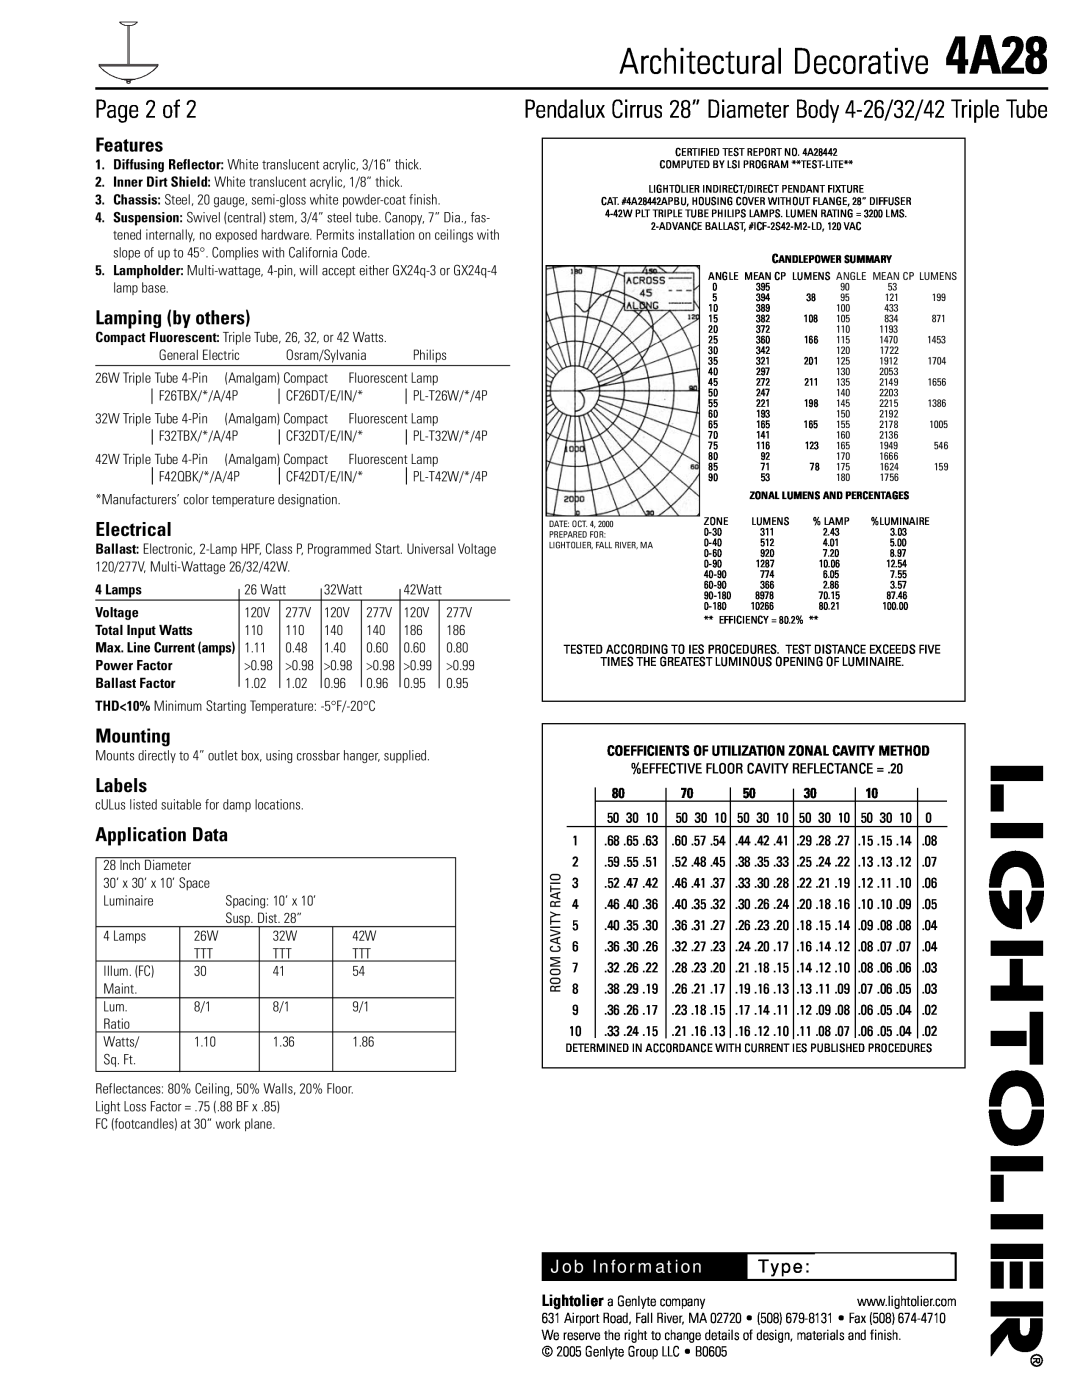 Lightolier 4A28 specifications Page 2 of, Features, Lamping by others, Electrical, Mounting, Labels, Application Data, Type 